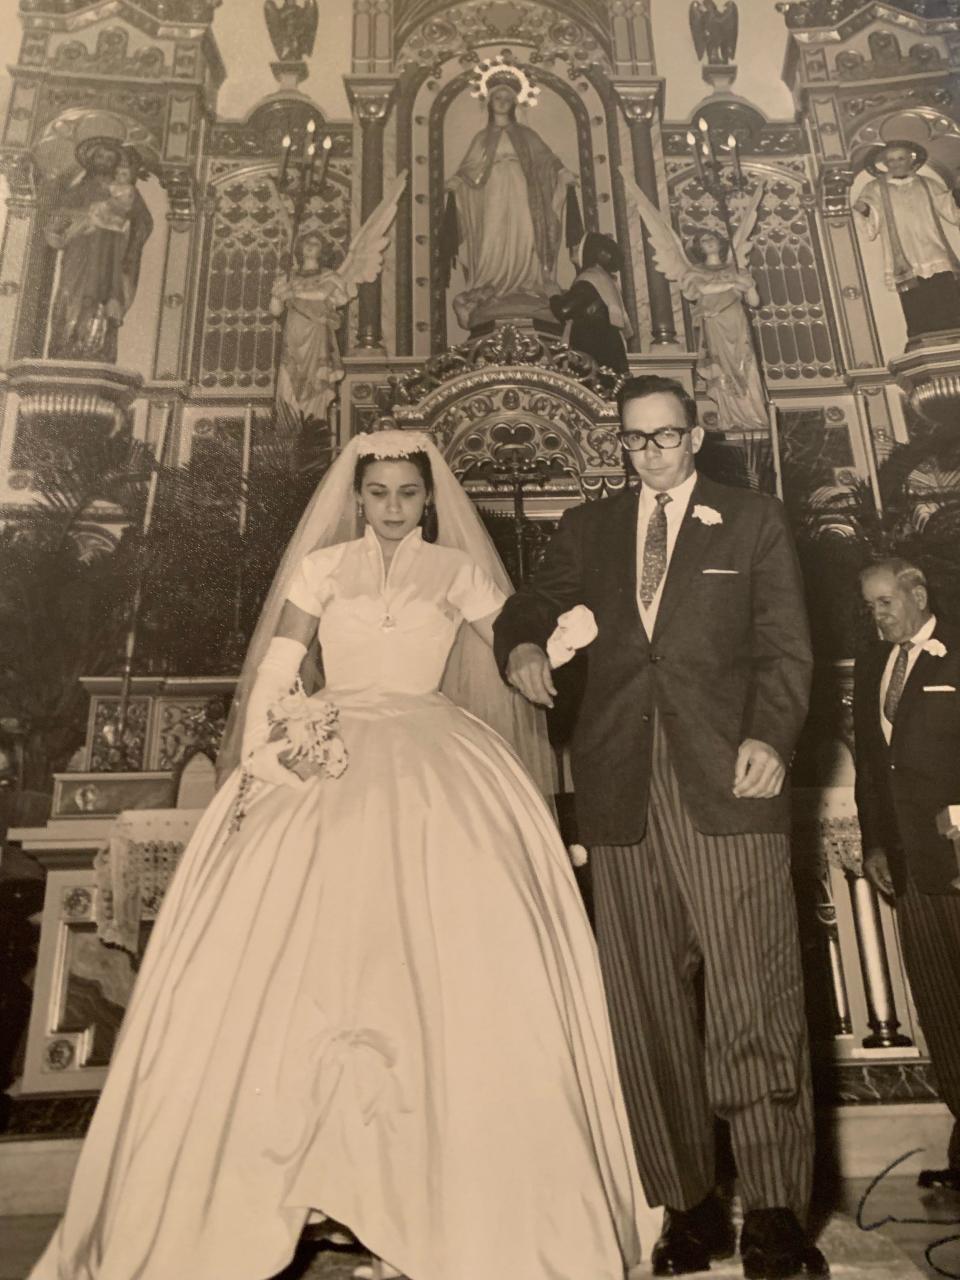 Chris Schlak's grandparents, Nereida and Tomás Rodriguez, getting married in 1958 at Our Lady of Miraculous Medal Catholic Church in Havana, Cuba.